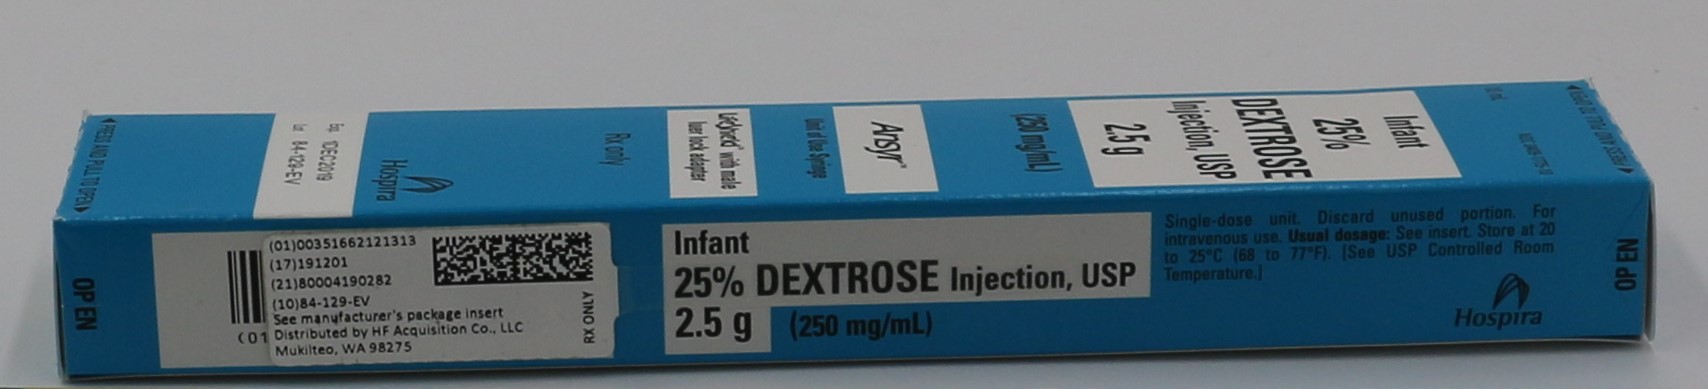 Serialized Label on Carton